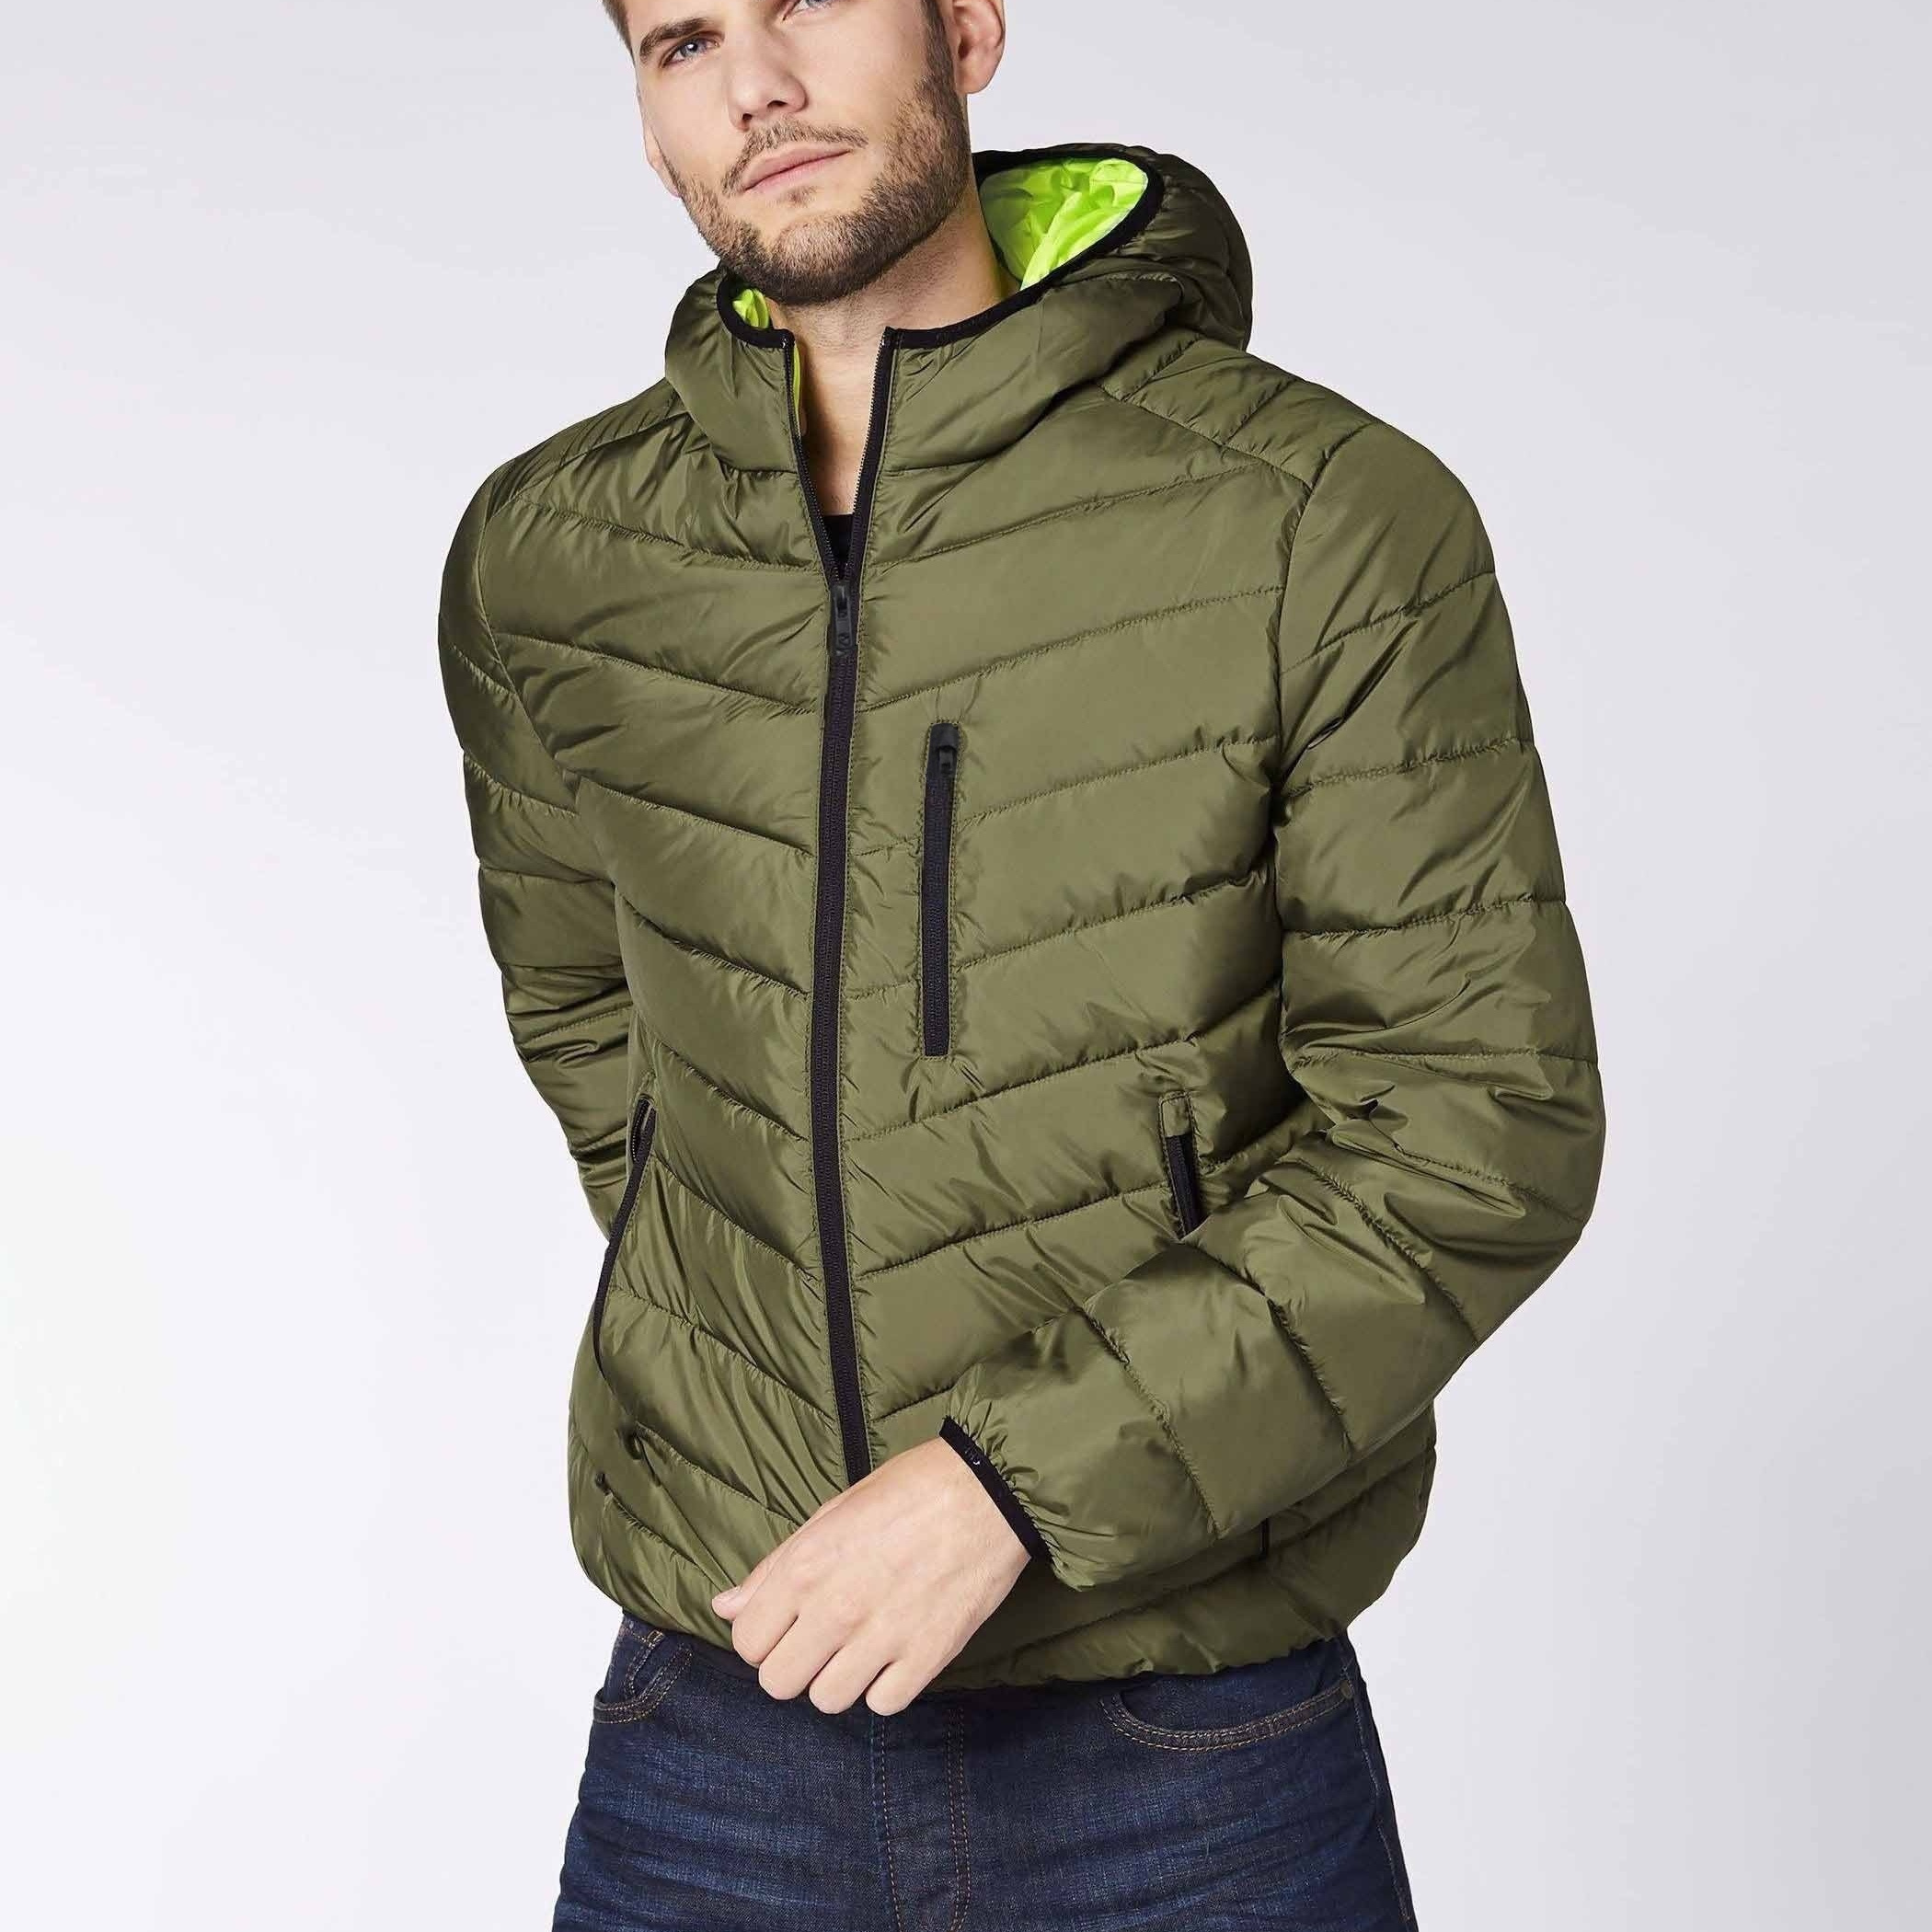 

Men's Plus Size Solid Chevron Hooded Quilted Jacket For Winter, Regular Lighweight Padded Outwear For Big & Tall Males, Men's Clothing Winter Coat Vest For Hunting Hiking Camping Fishing